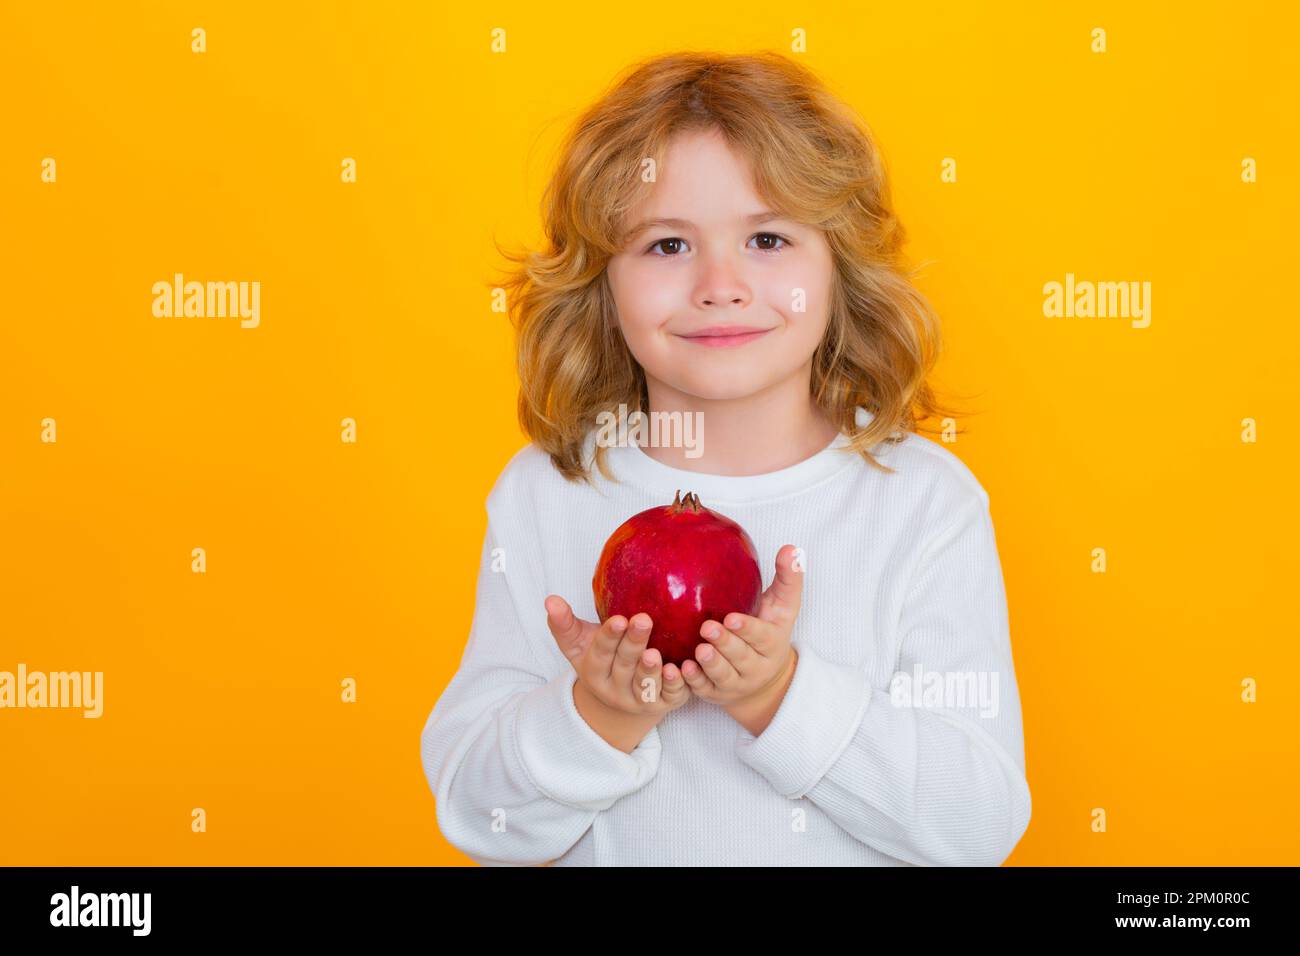 Healthy fruits for kids. Kid hold red pomegranate in studio. Pomegranate fruit. Studio portrait of cute child with pomegranate isolated on yellow back Stock Photo